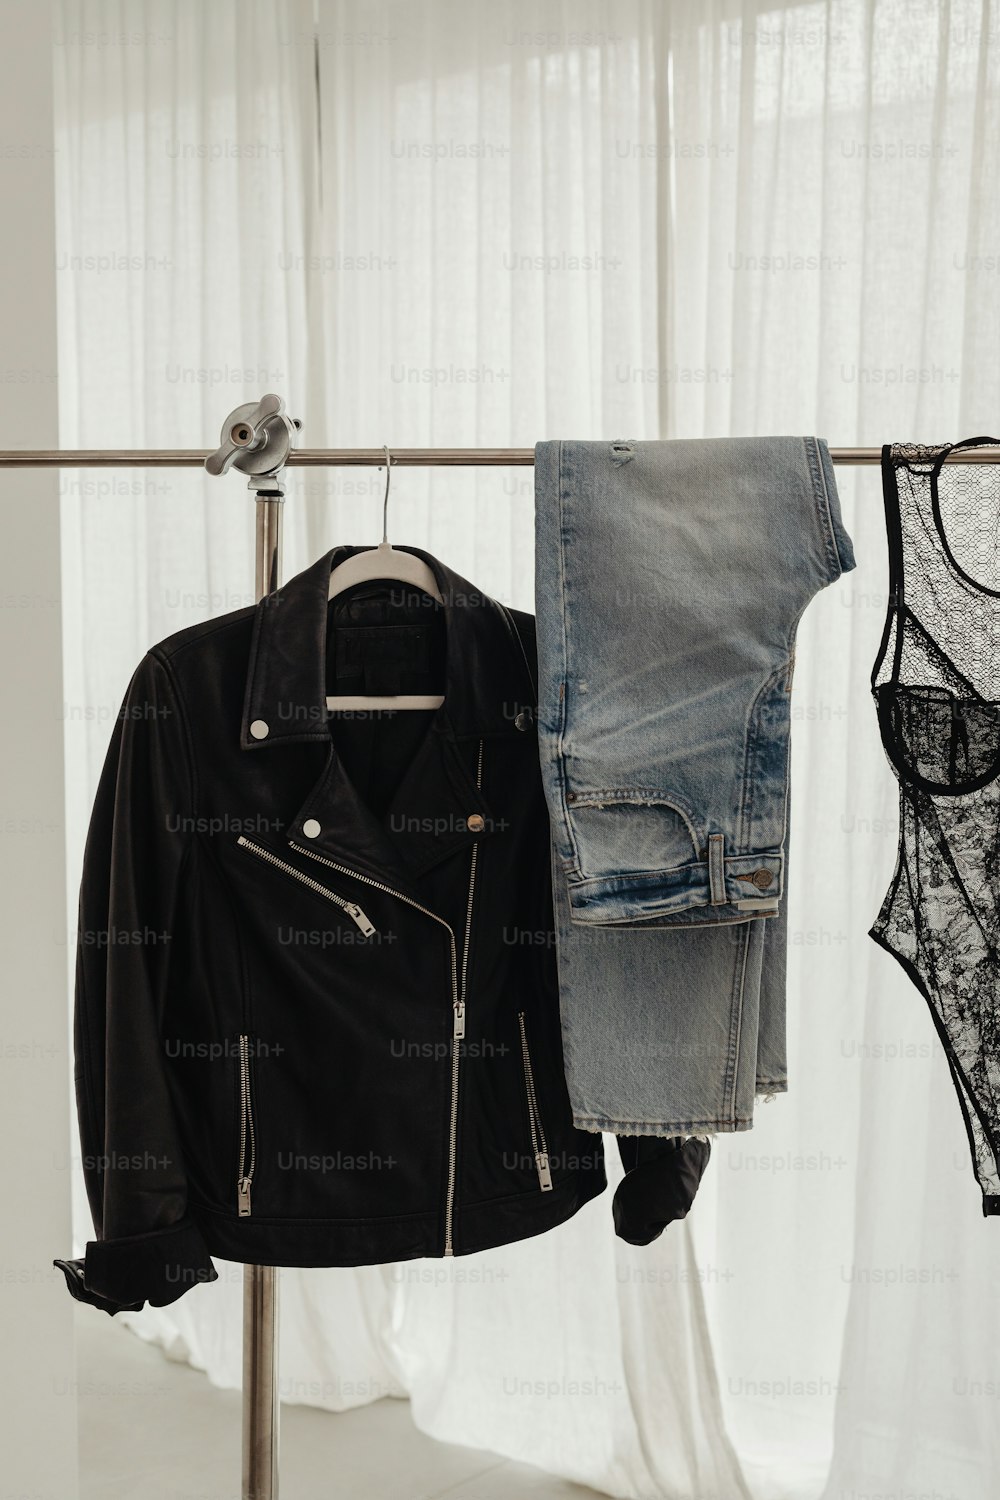 A pair of lingerie bras hanging from a clothes line photo – Lenceria Image  on Unsplash